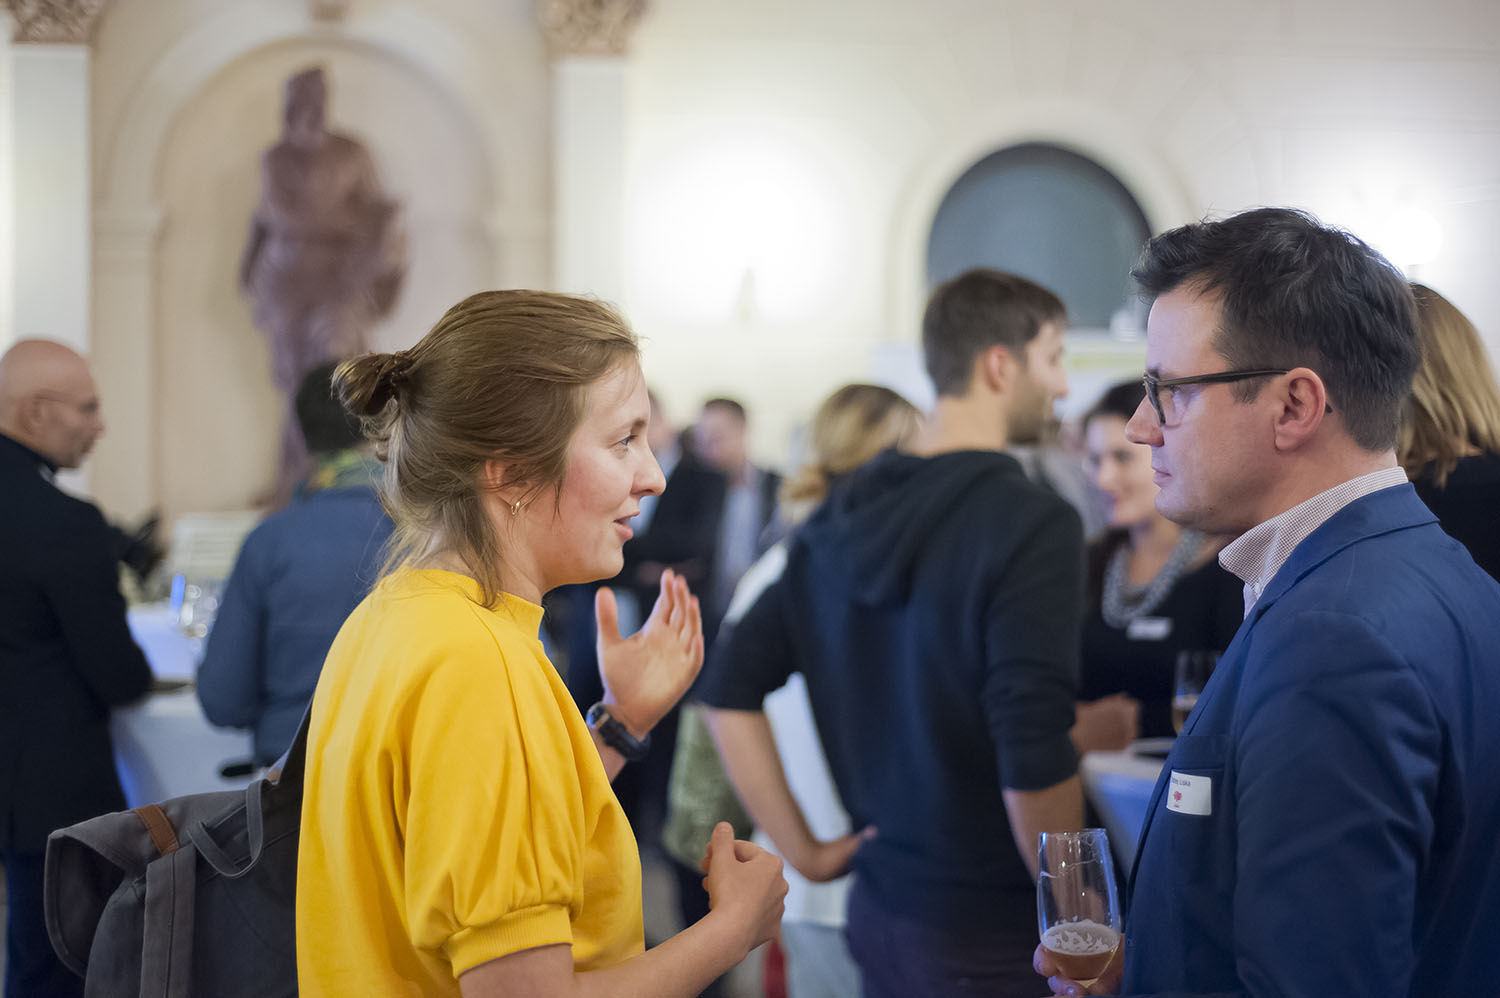 Networking. Young woman in a yellow shirt and man in a blue suit speaking at the Ashoka Visionary Program Kick-Off 2017, with more conversations in the background.